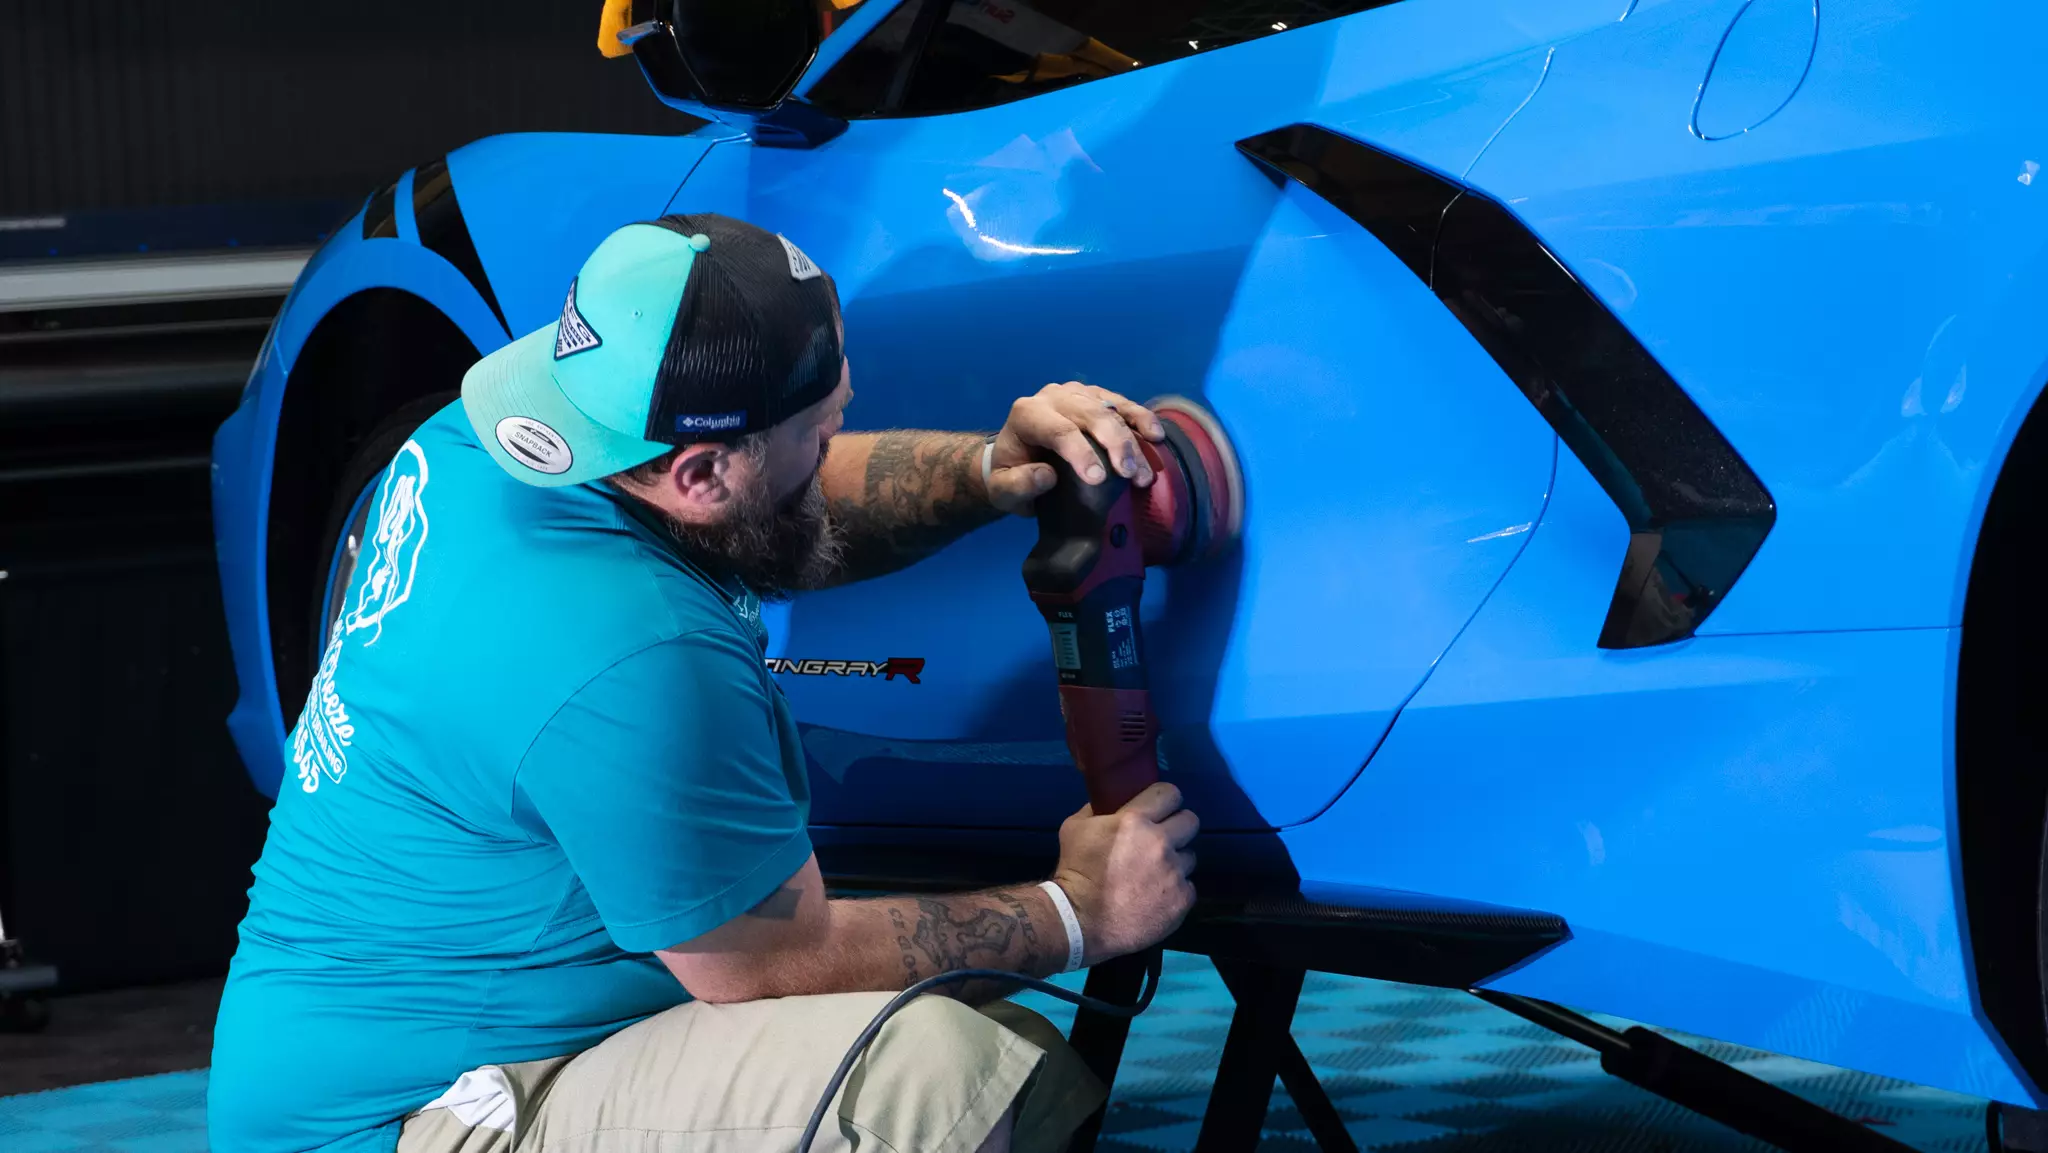 Owner of Summer Breeze Ceramic Coating & Mobile Detailing, Brian, buffering the exterior of a blue corvette